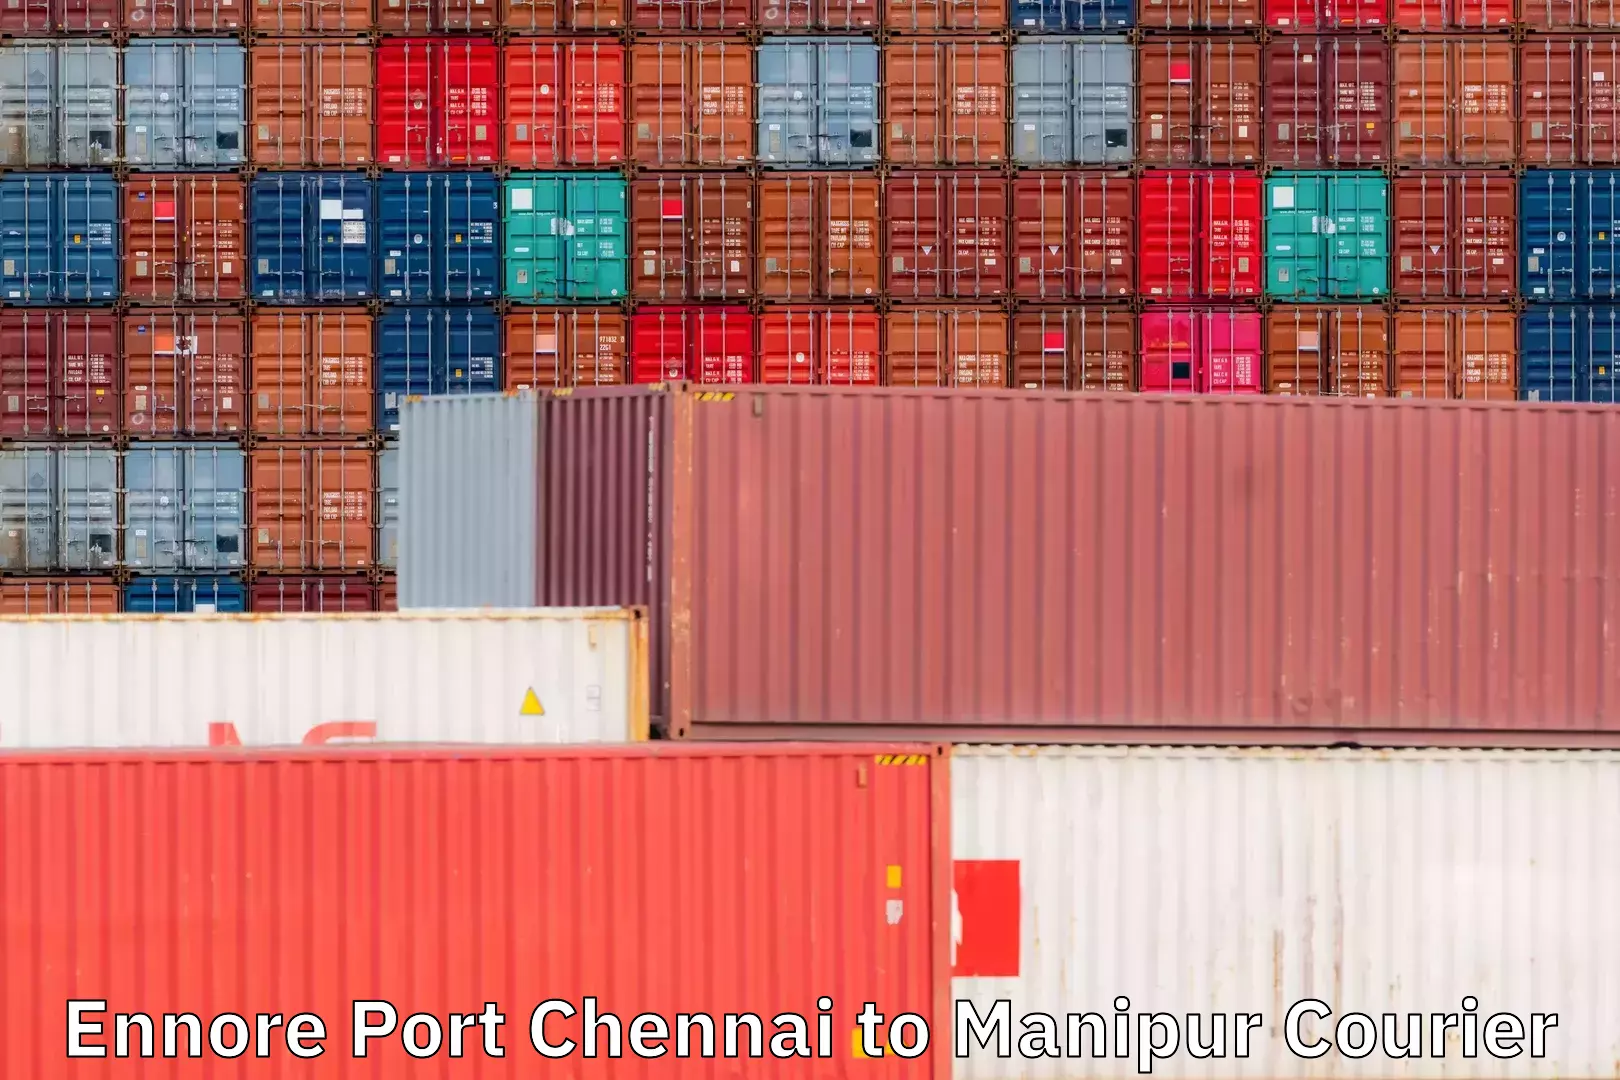 Efficient shipping operations Ennore Port Chennai to Manipur